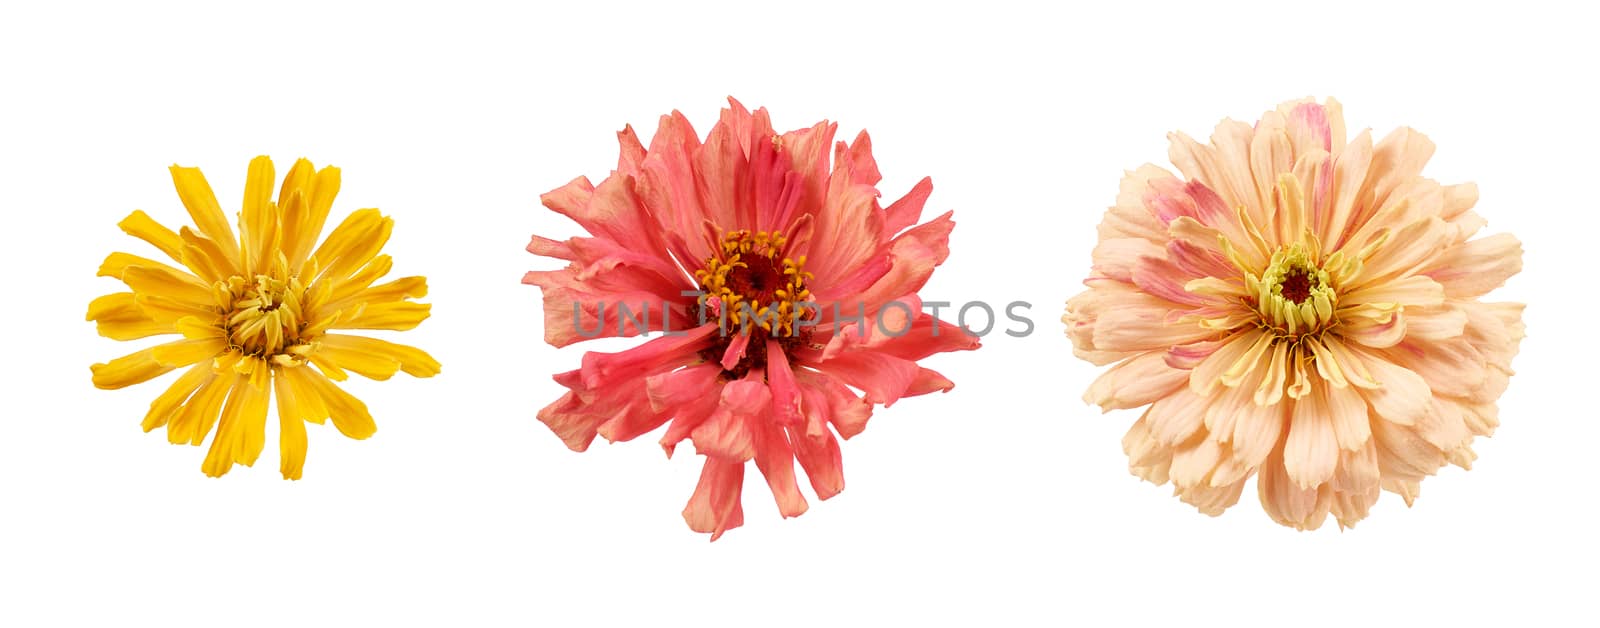 set of blooming zinnia buds isolated on white background by ndanko